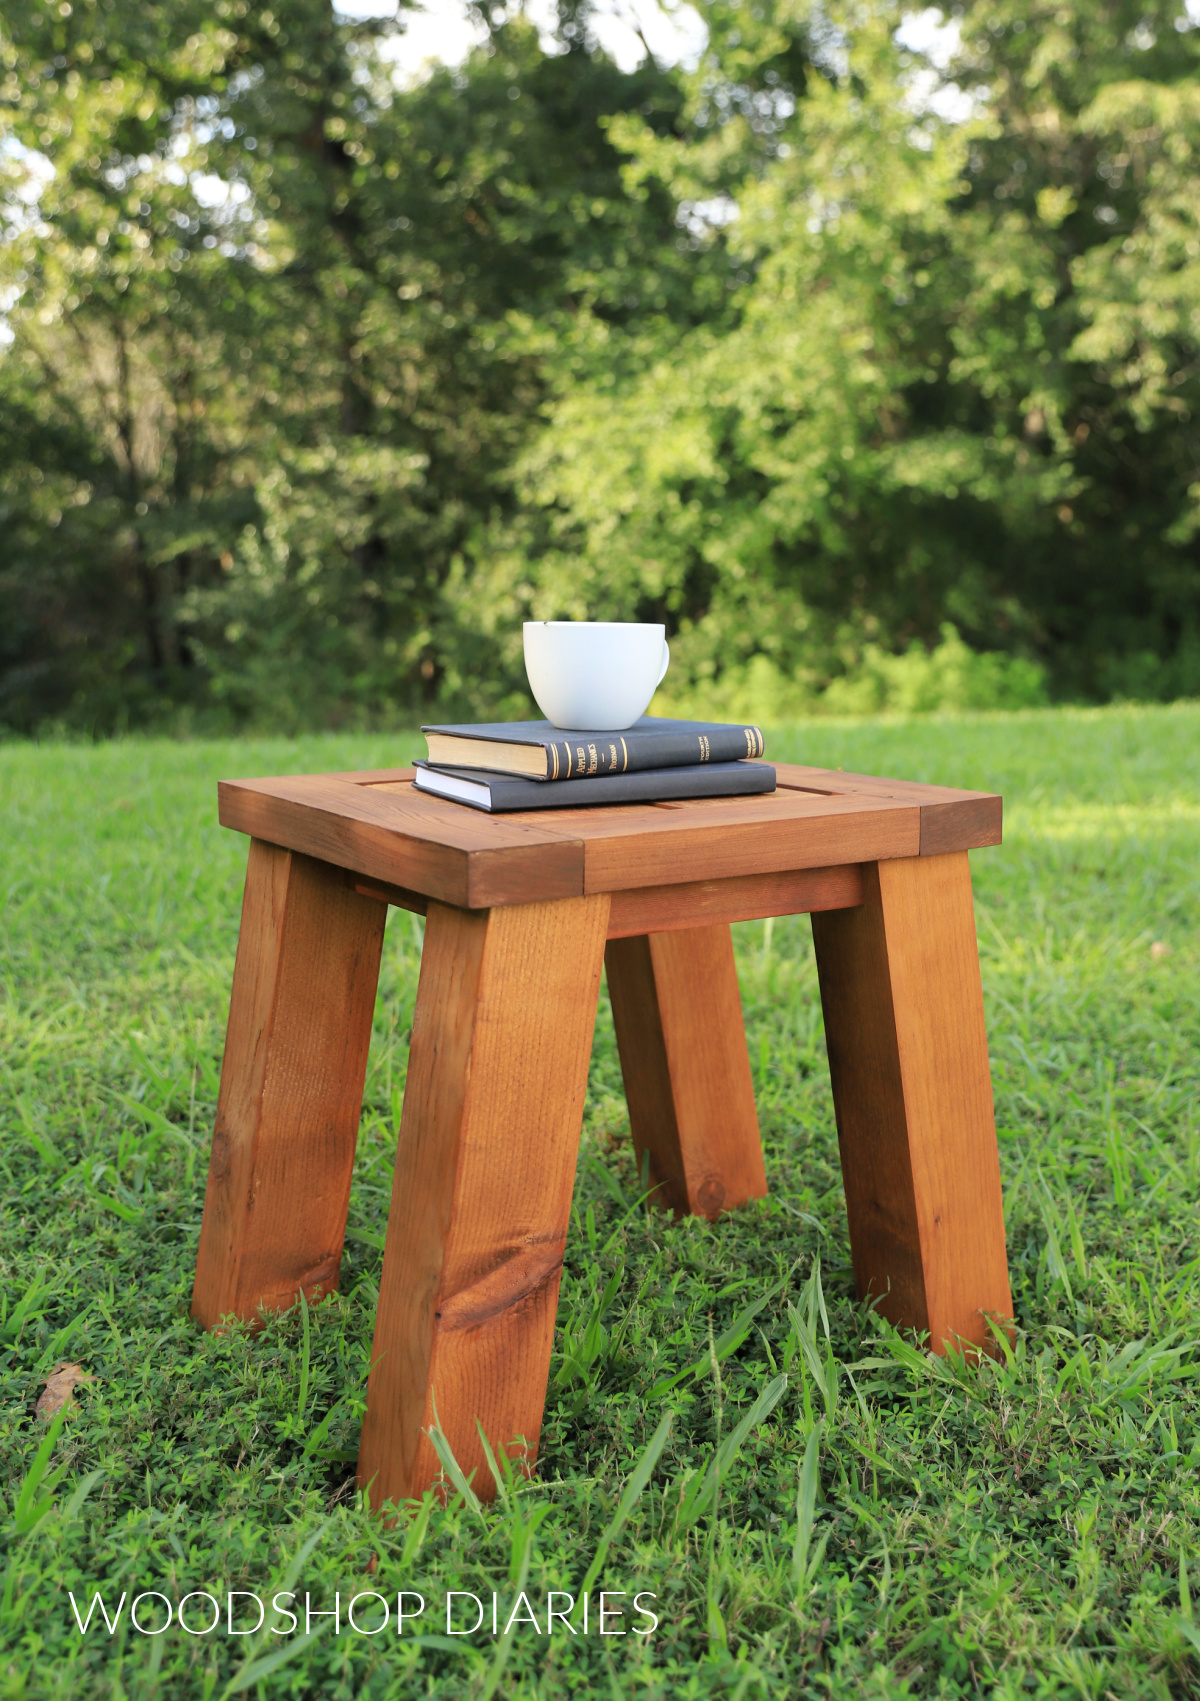 Simple wooden outdoor side table with books and mug on top sitting in grassy area outside